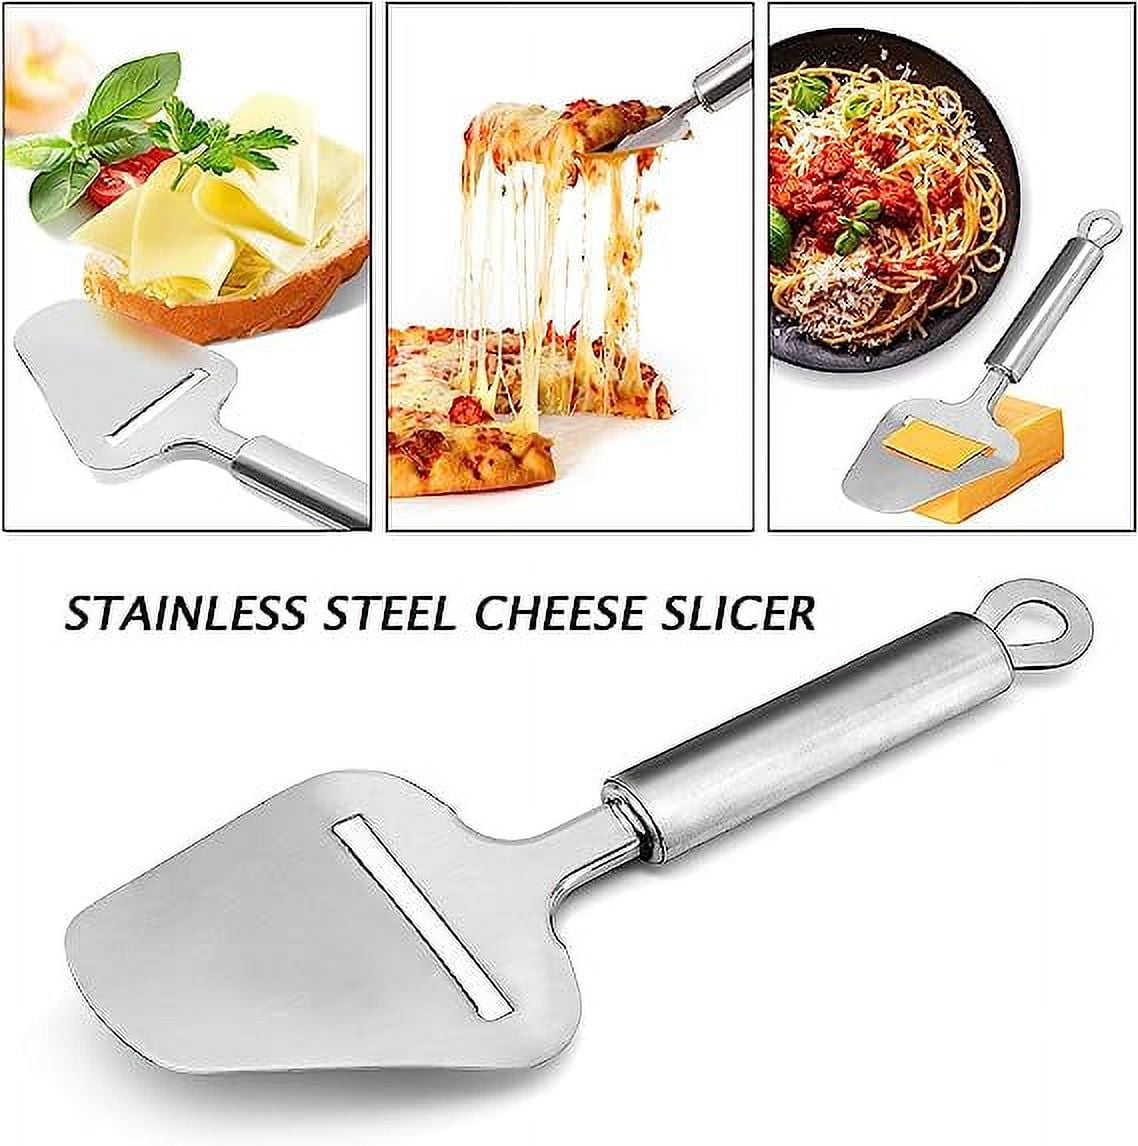  Cheese Slicer with Wire Stainless Steel Cheese Cutter for  Cheddar, Gruyere, Raclette, and Mozzarella Cheese Block Adjustable Shaver  for Thick & Thin Slices Strong and Durable Zinc Alloy One Extra Wire